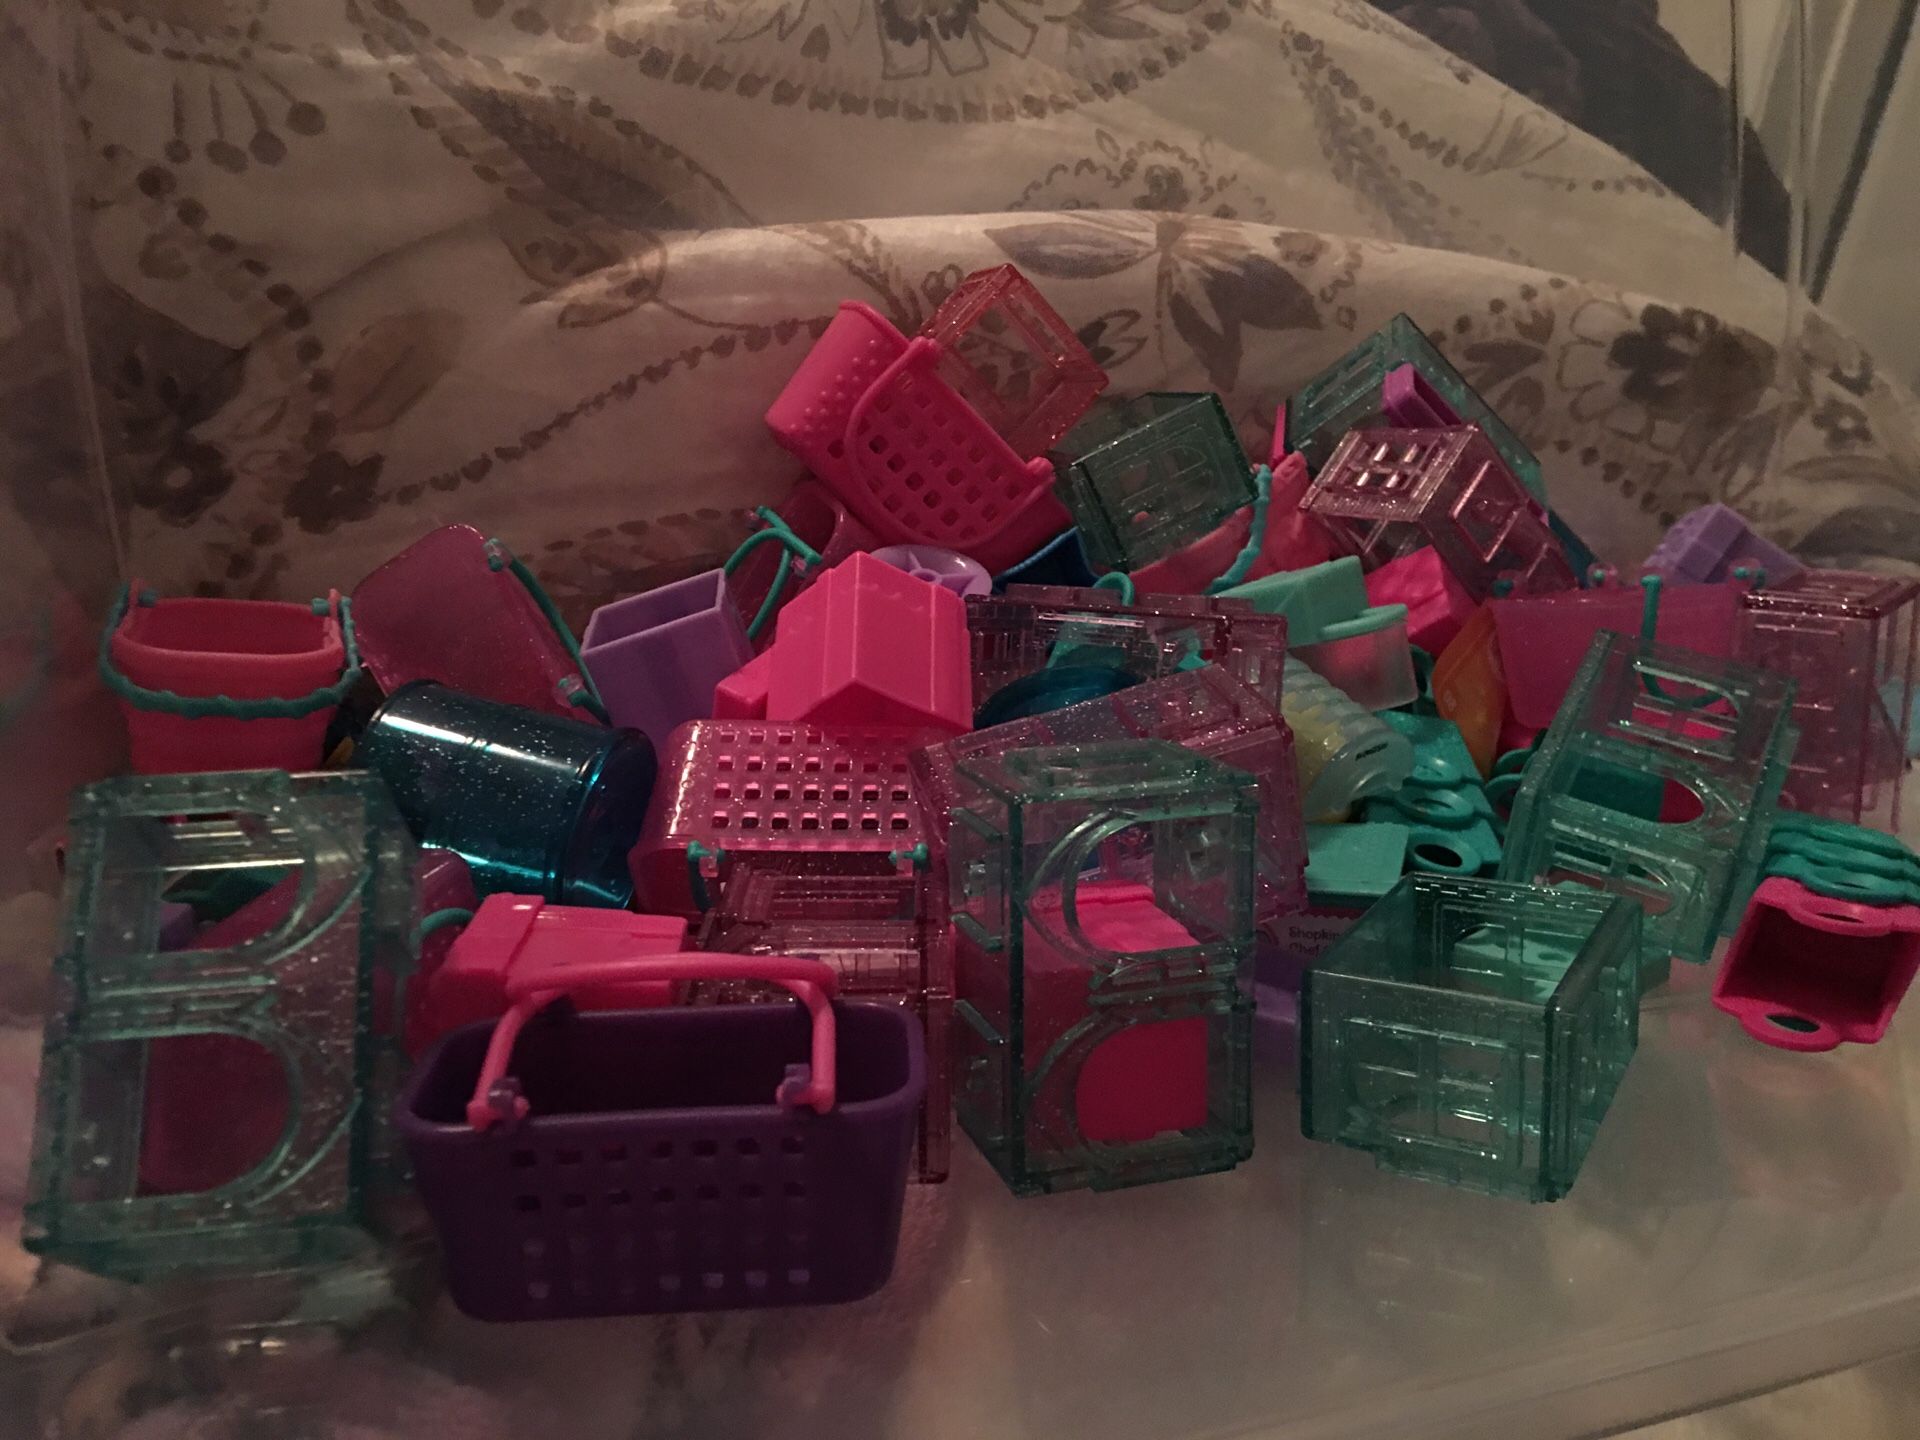 Lots of Shopkins baskets and containers/ boxes